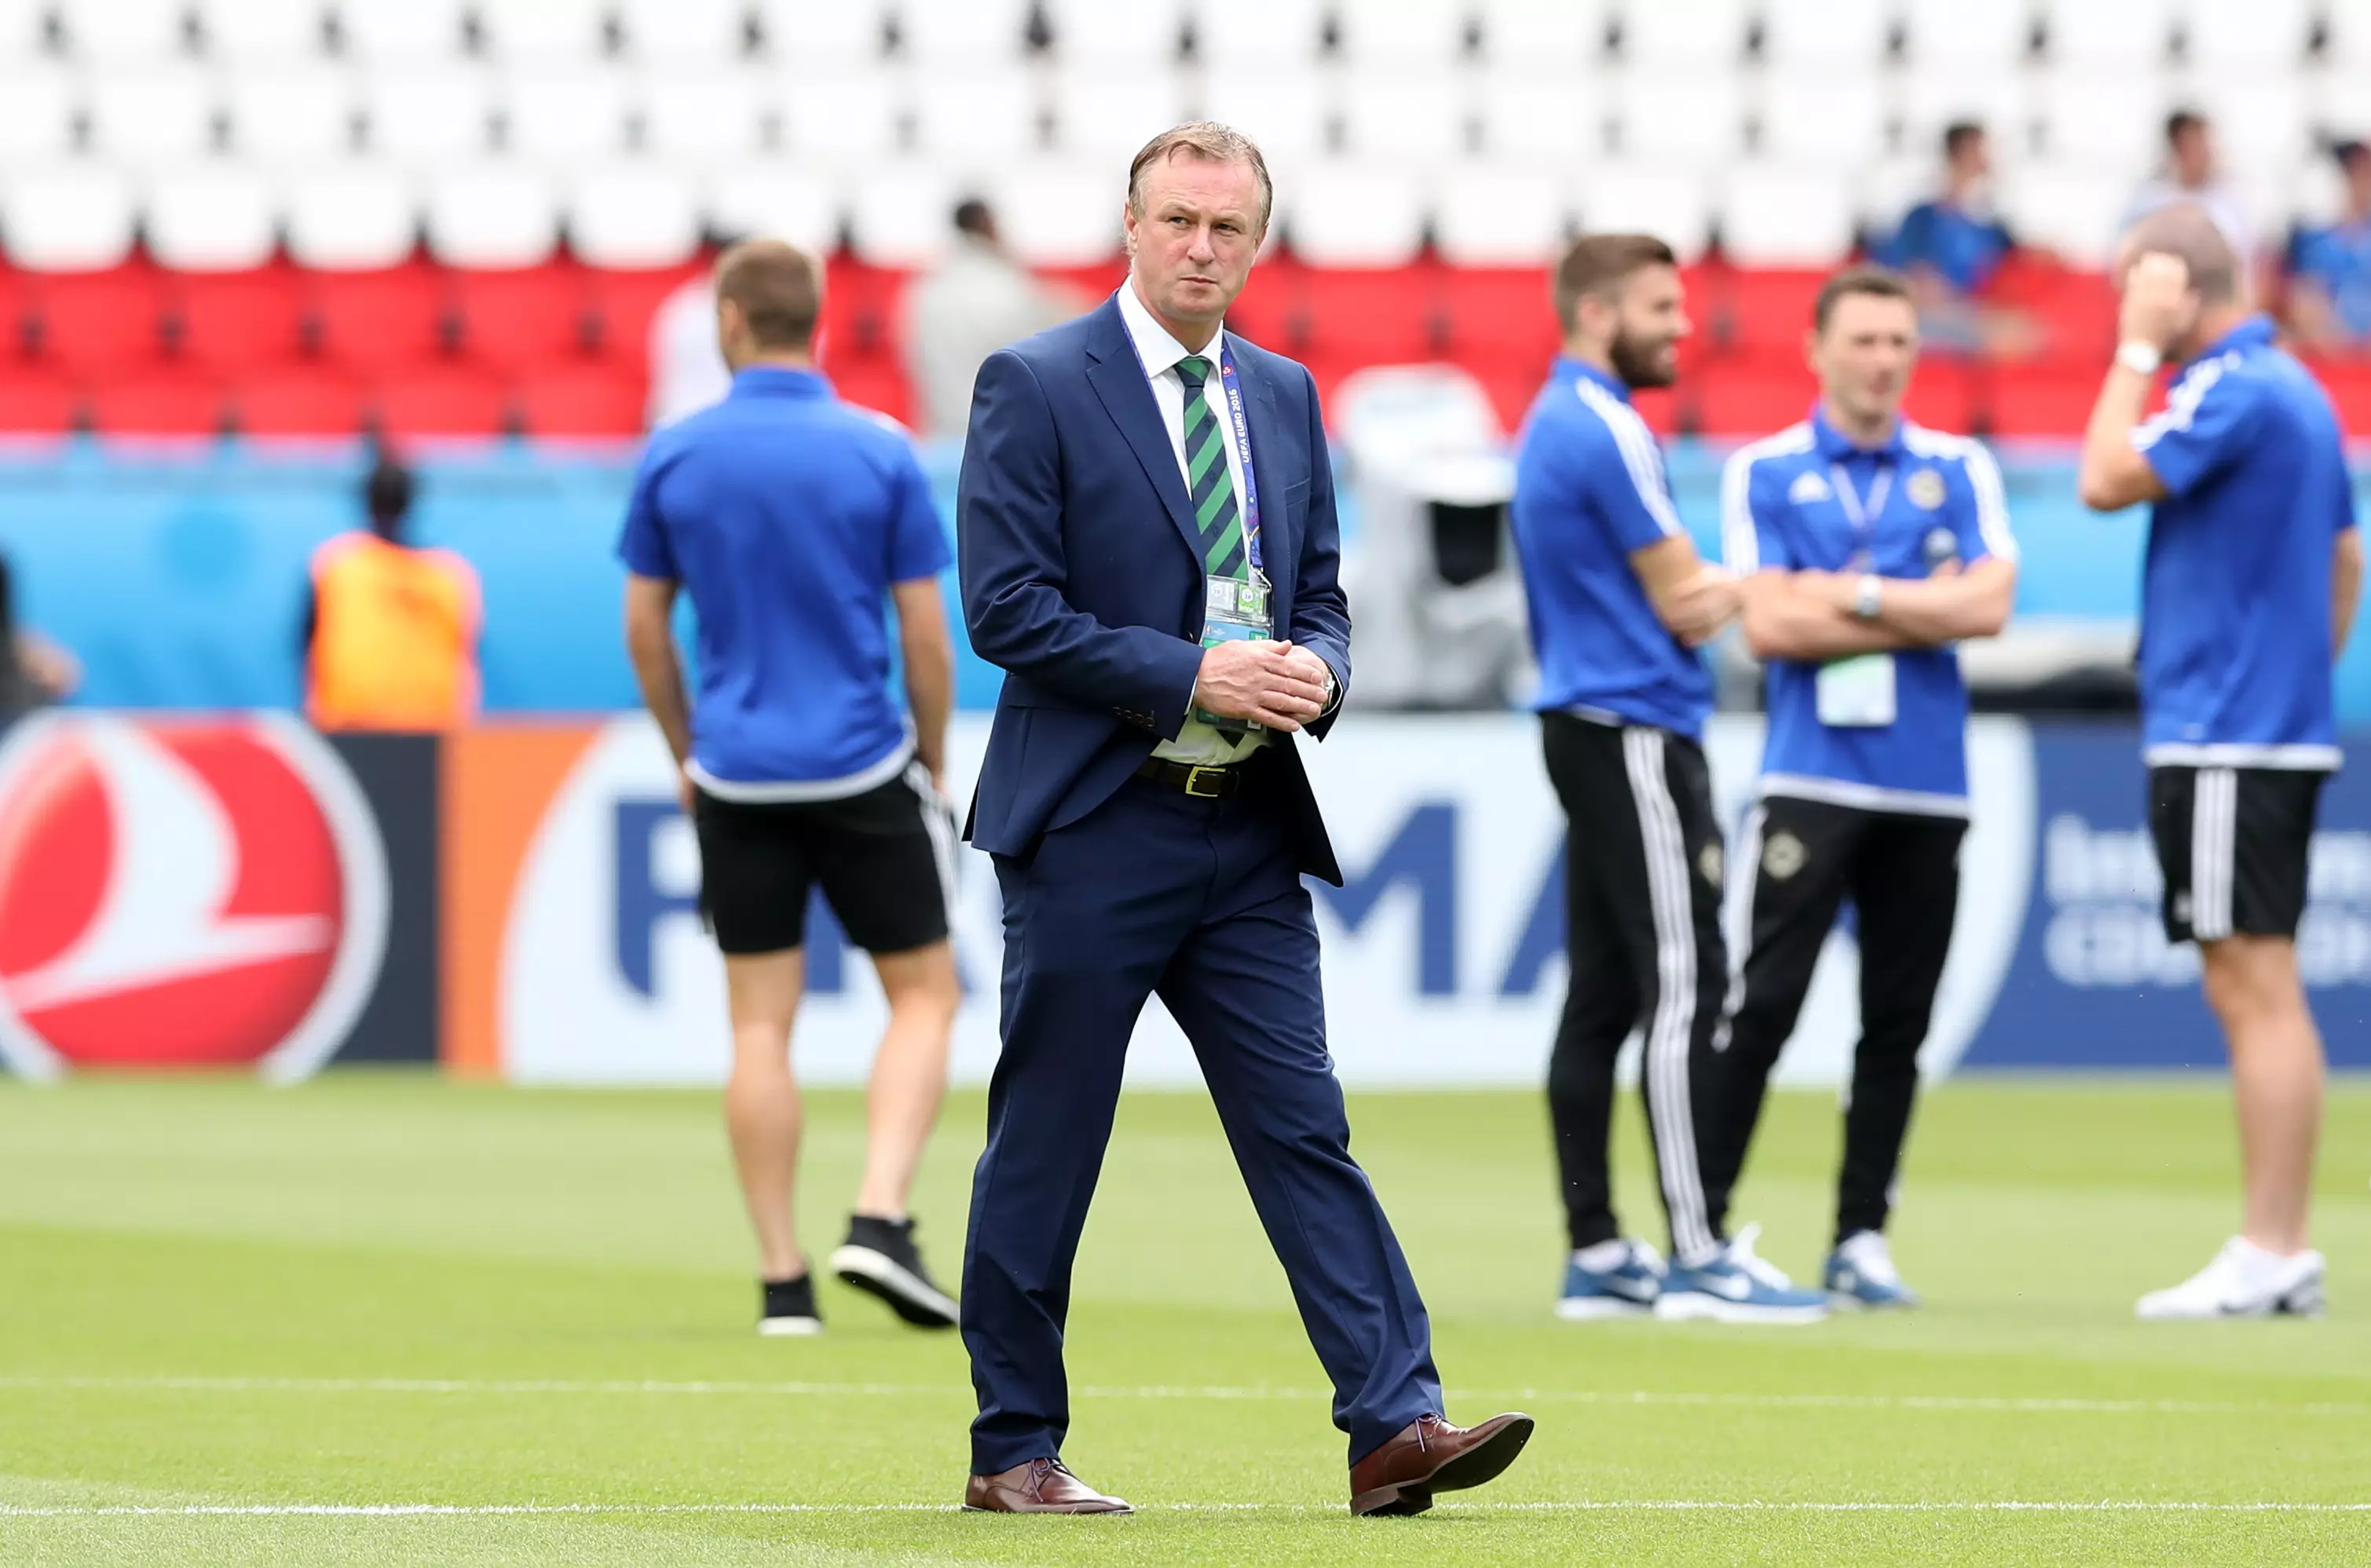 Northern Ireland Manager Reveals Why He Didn't Play Will Grigg During Euro's